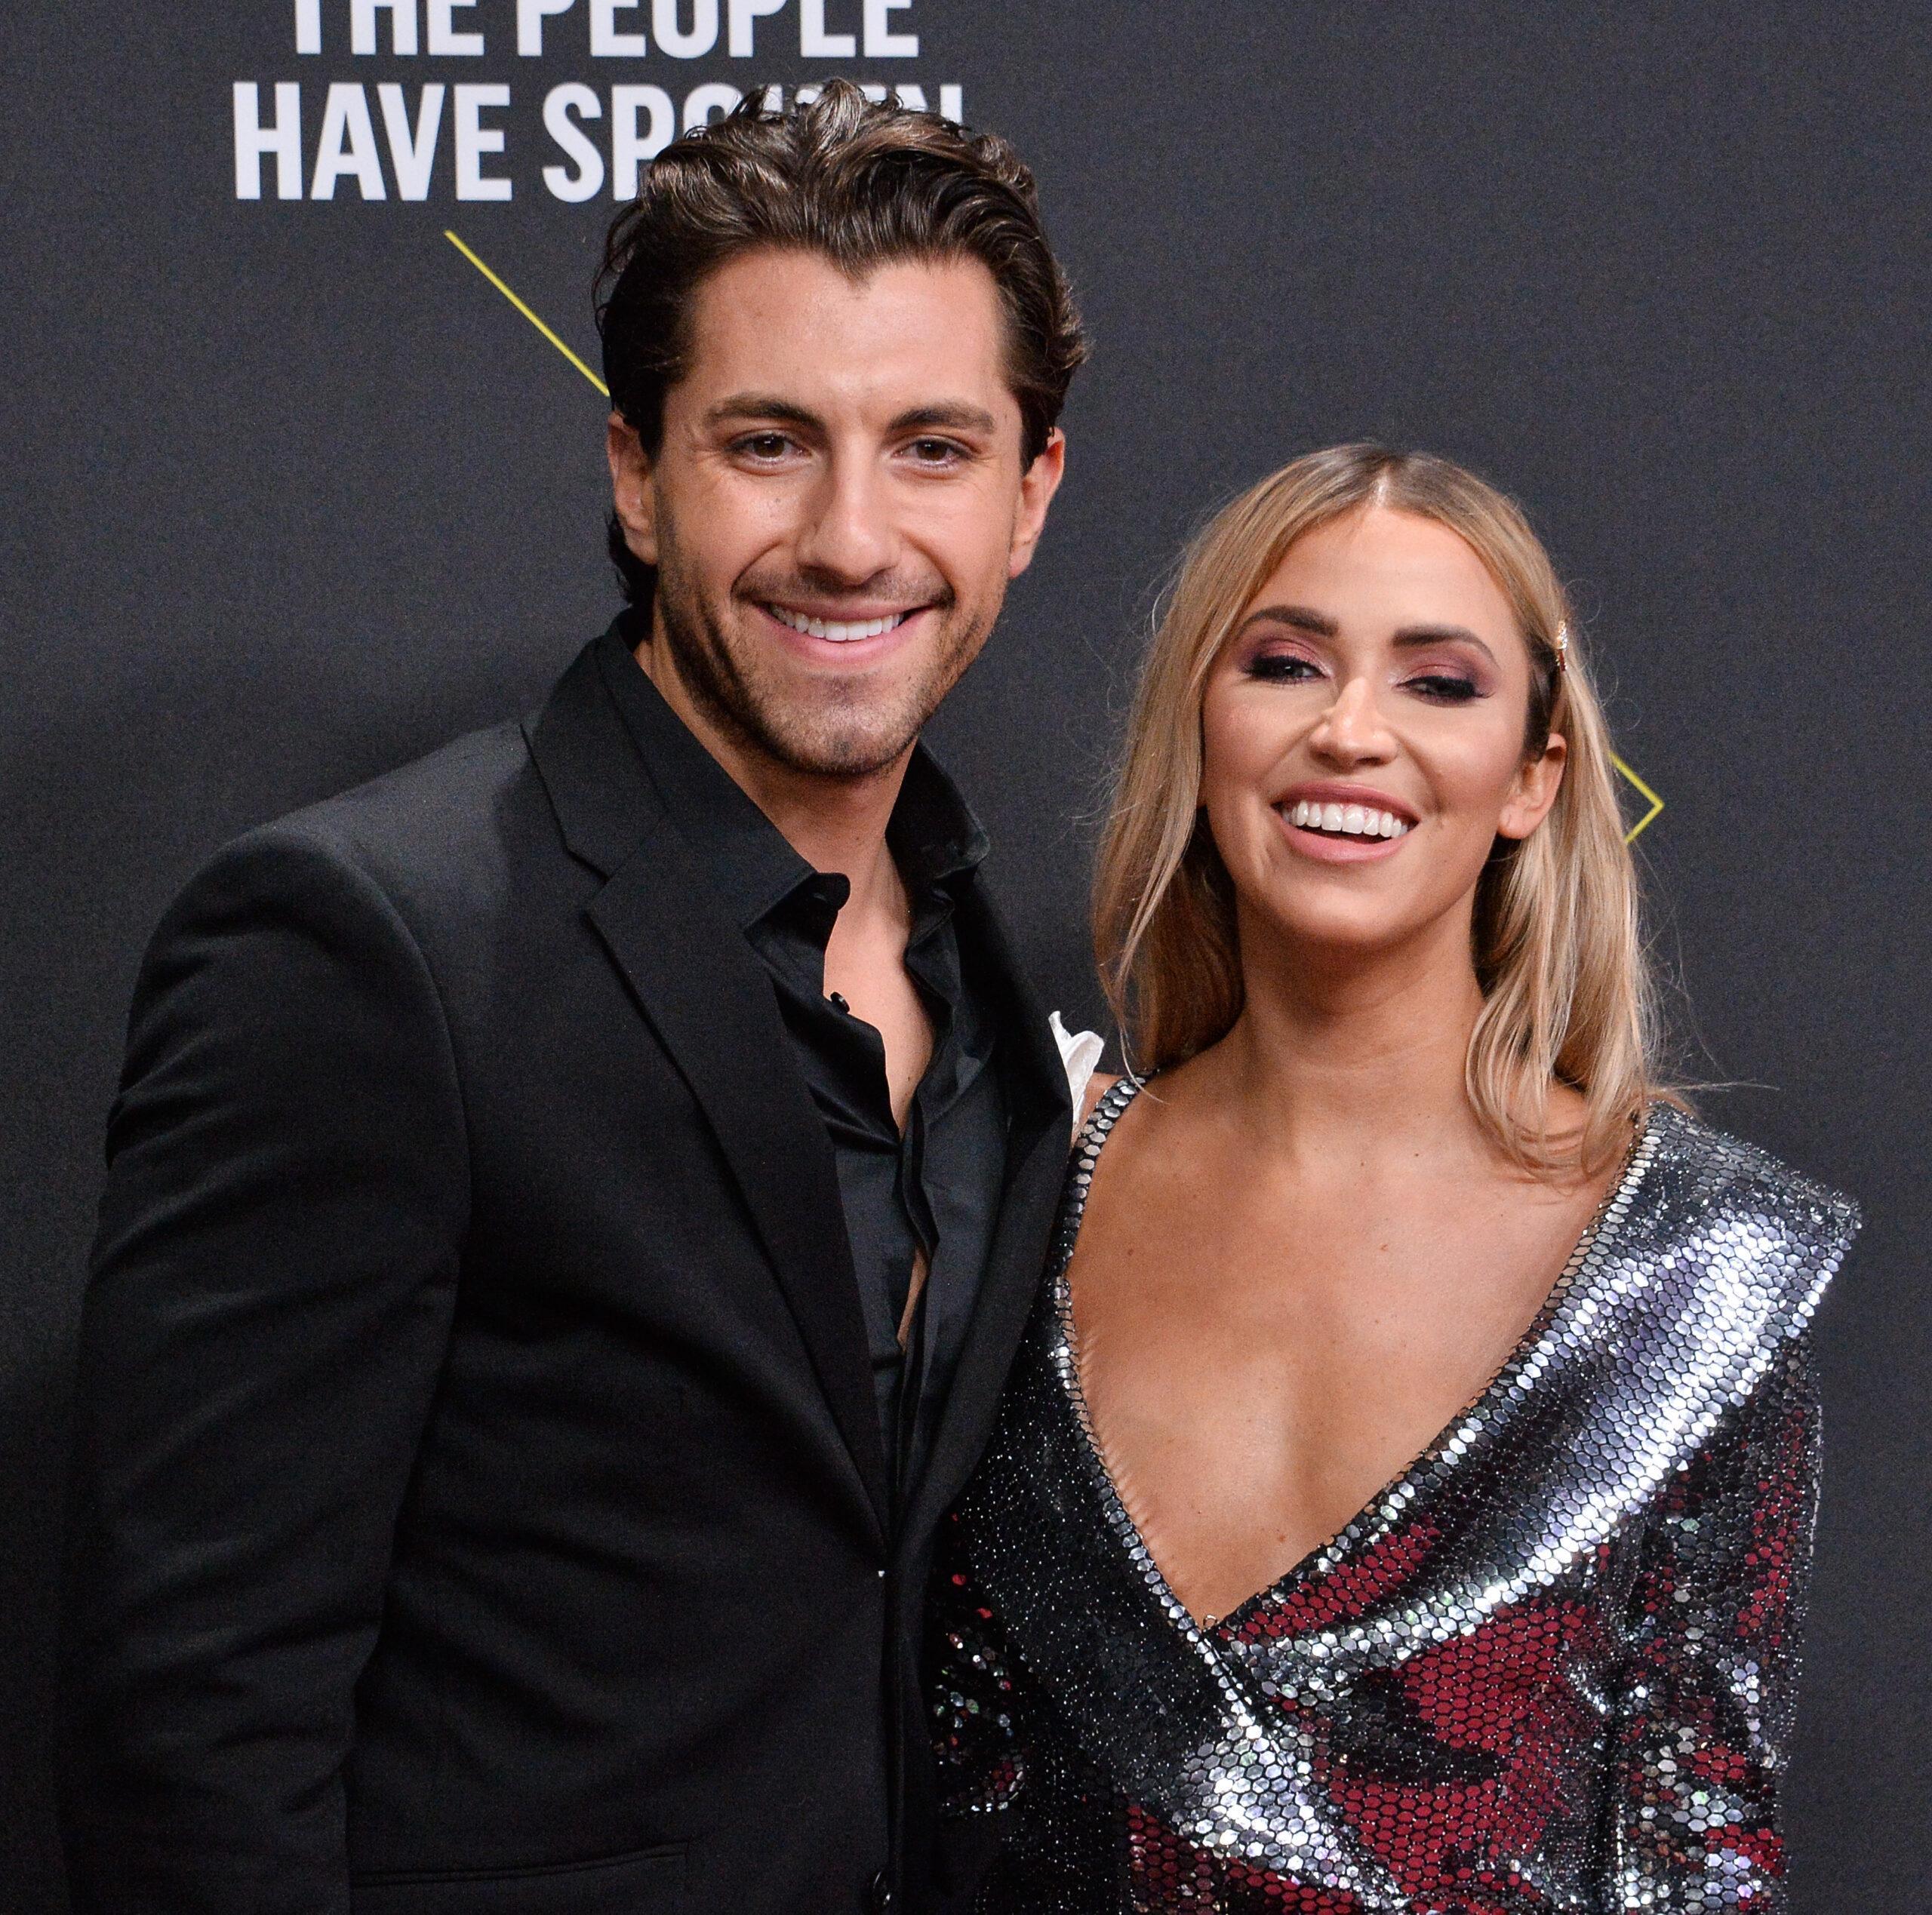 Jason Tartick and Kaitlyn Bristowe attend E! People's Choice Awards in Santa Monica